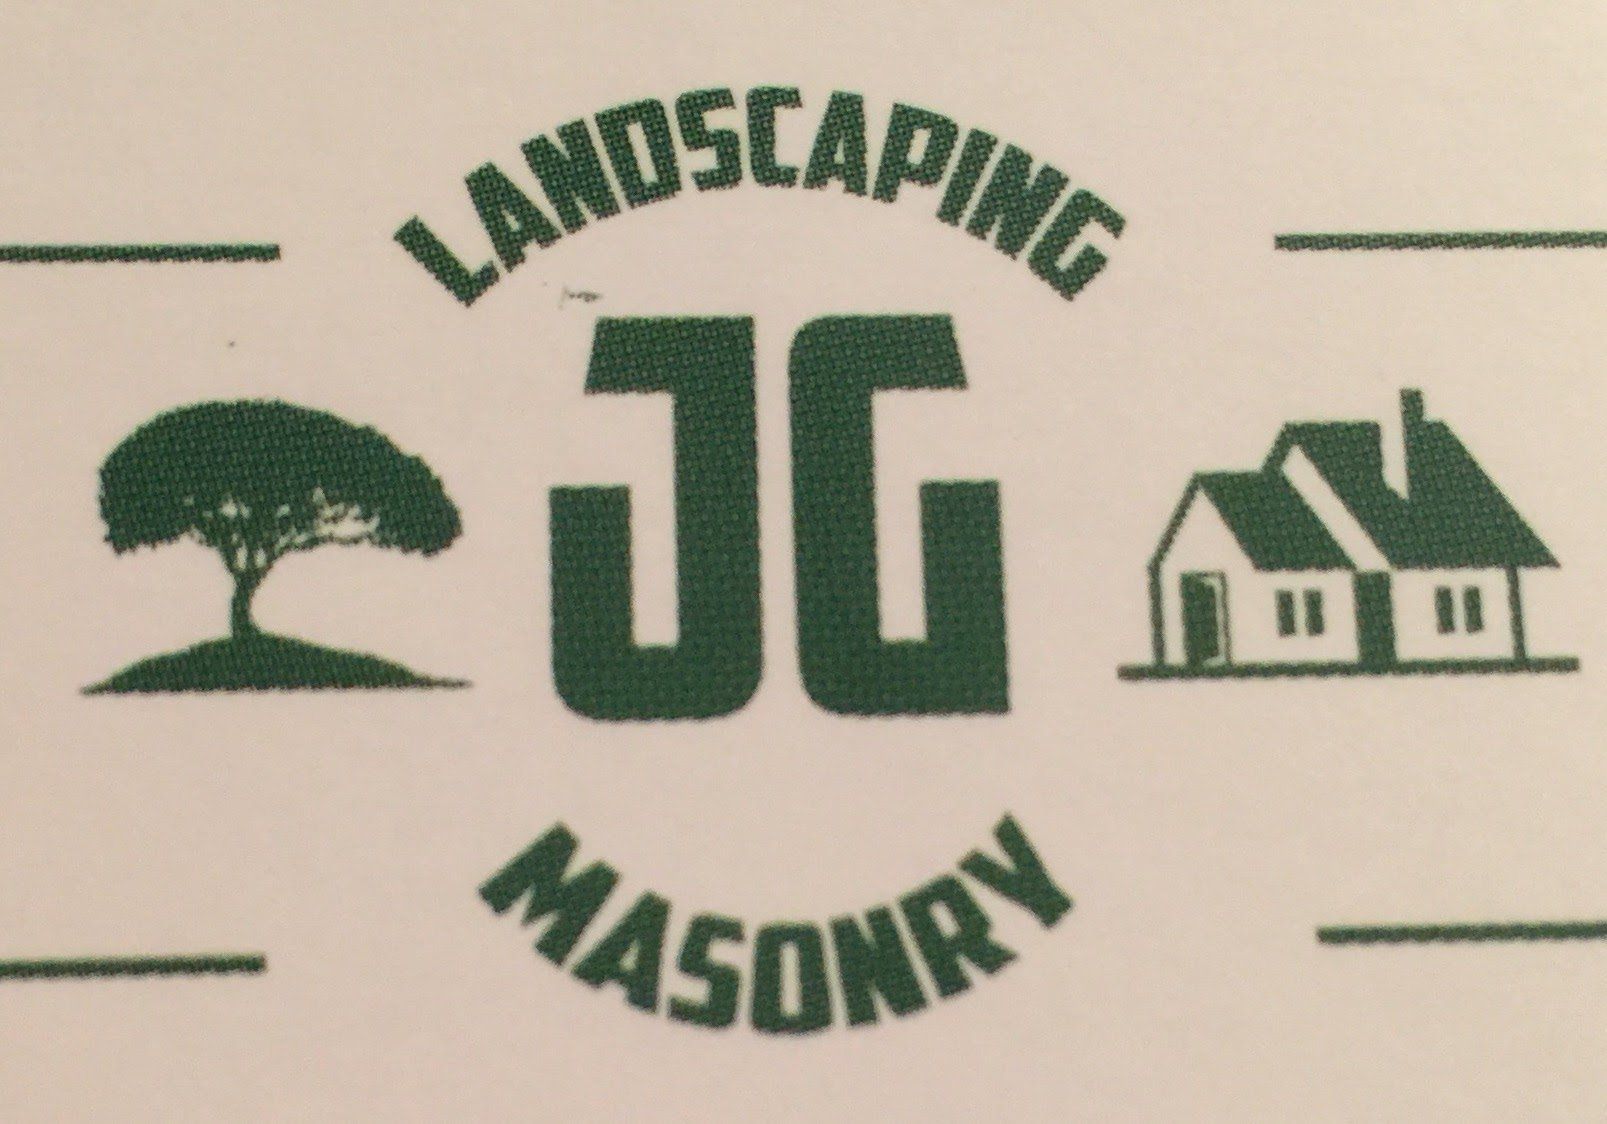 JG Landscaping in Copiague, NY